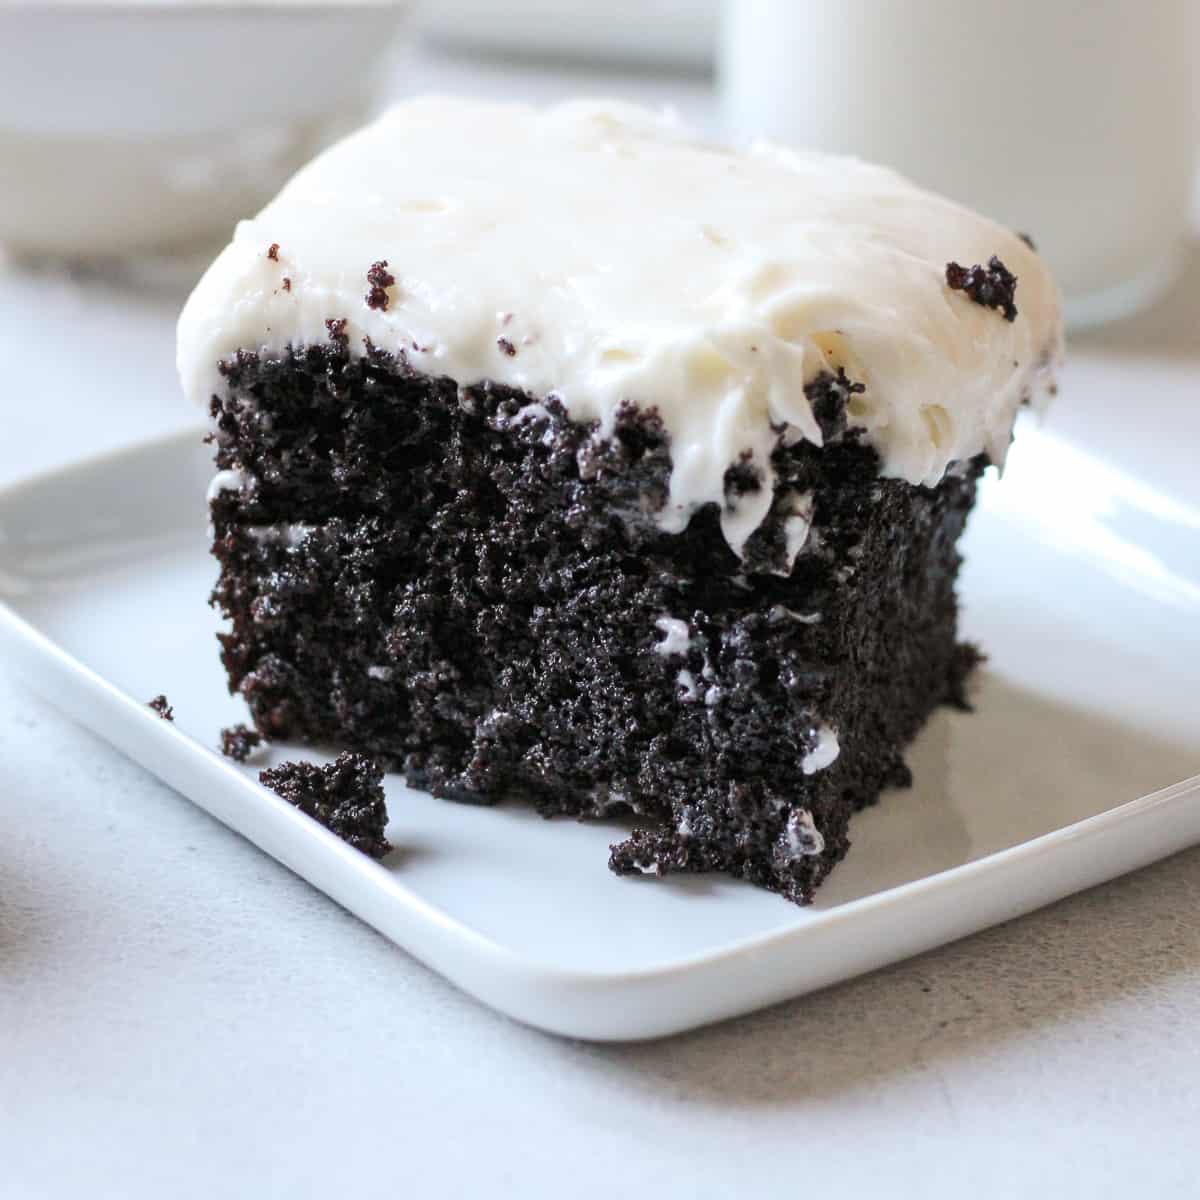 Chocolate cake with cream cheese frosting is a great dessert to go with spaghetti.